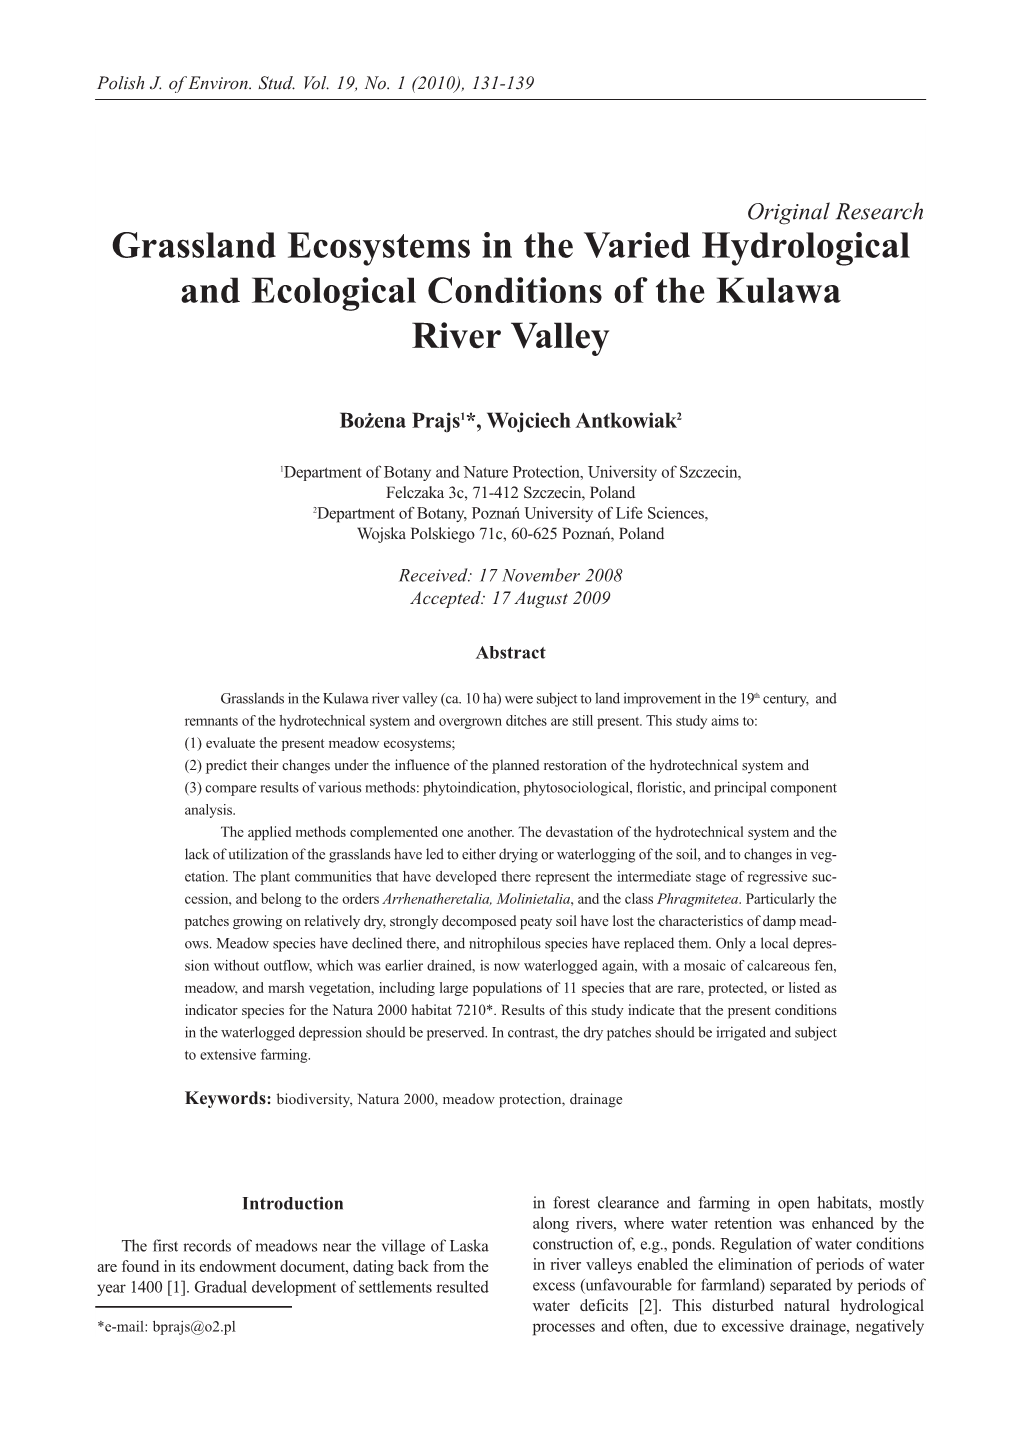 Grassland Ecosystems in the Varied Hydrological and Ecological Conditions of the Kulawa River Valley